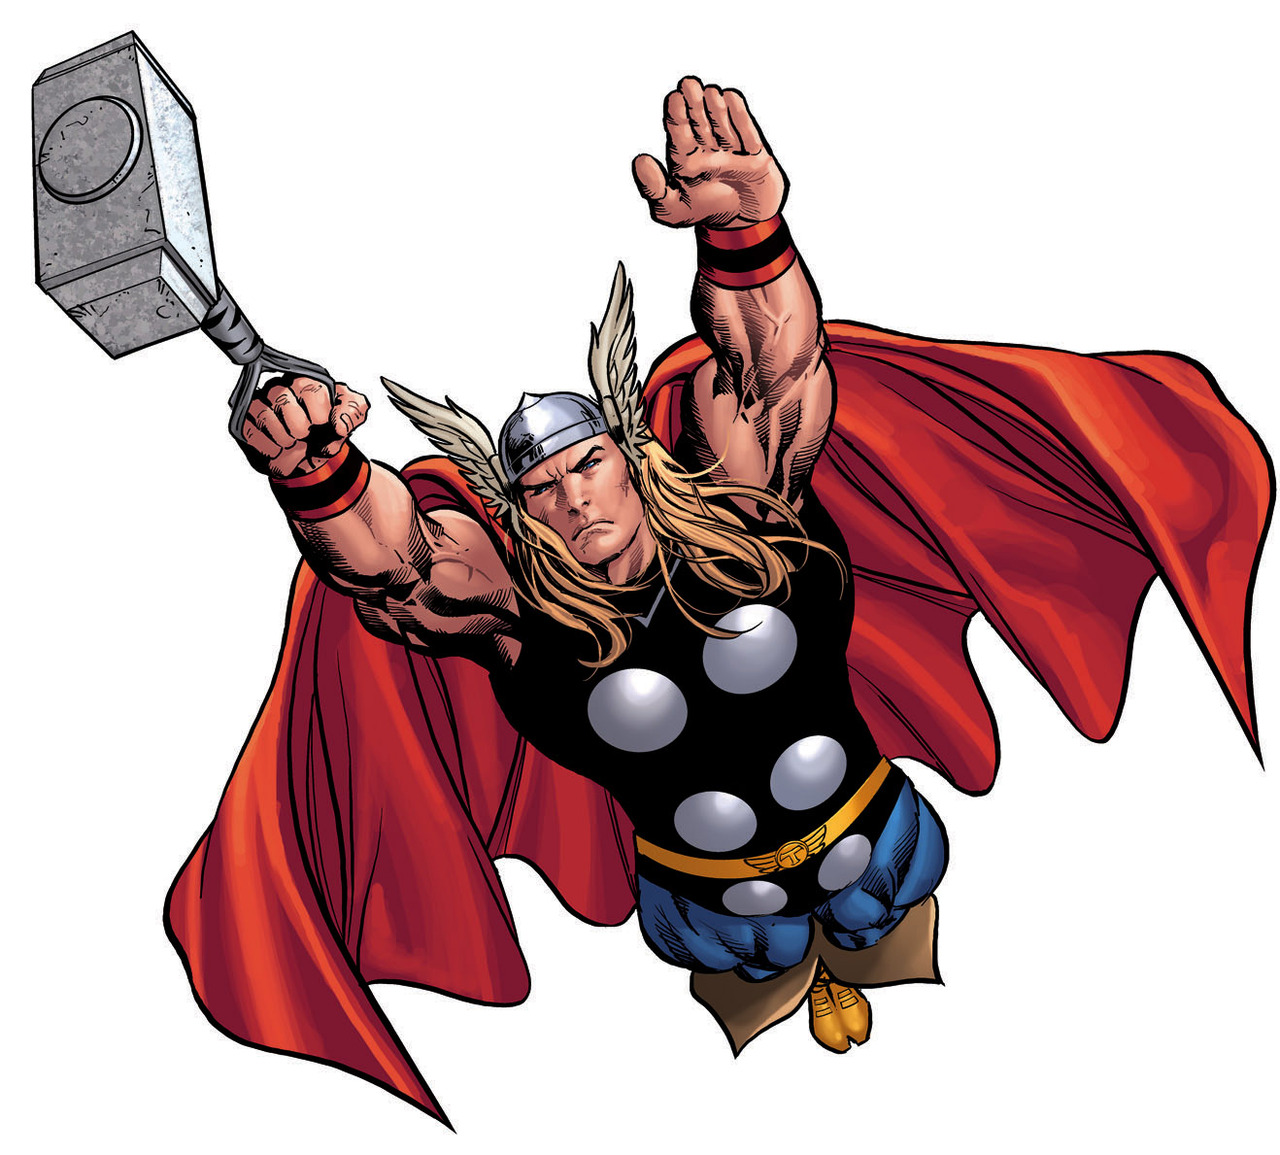 Thor coloring page - free printable coloring pages on 